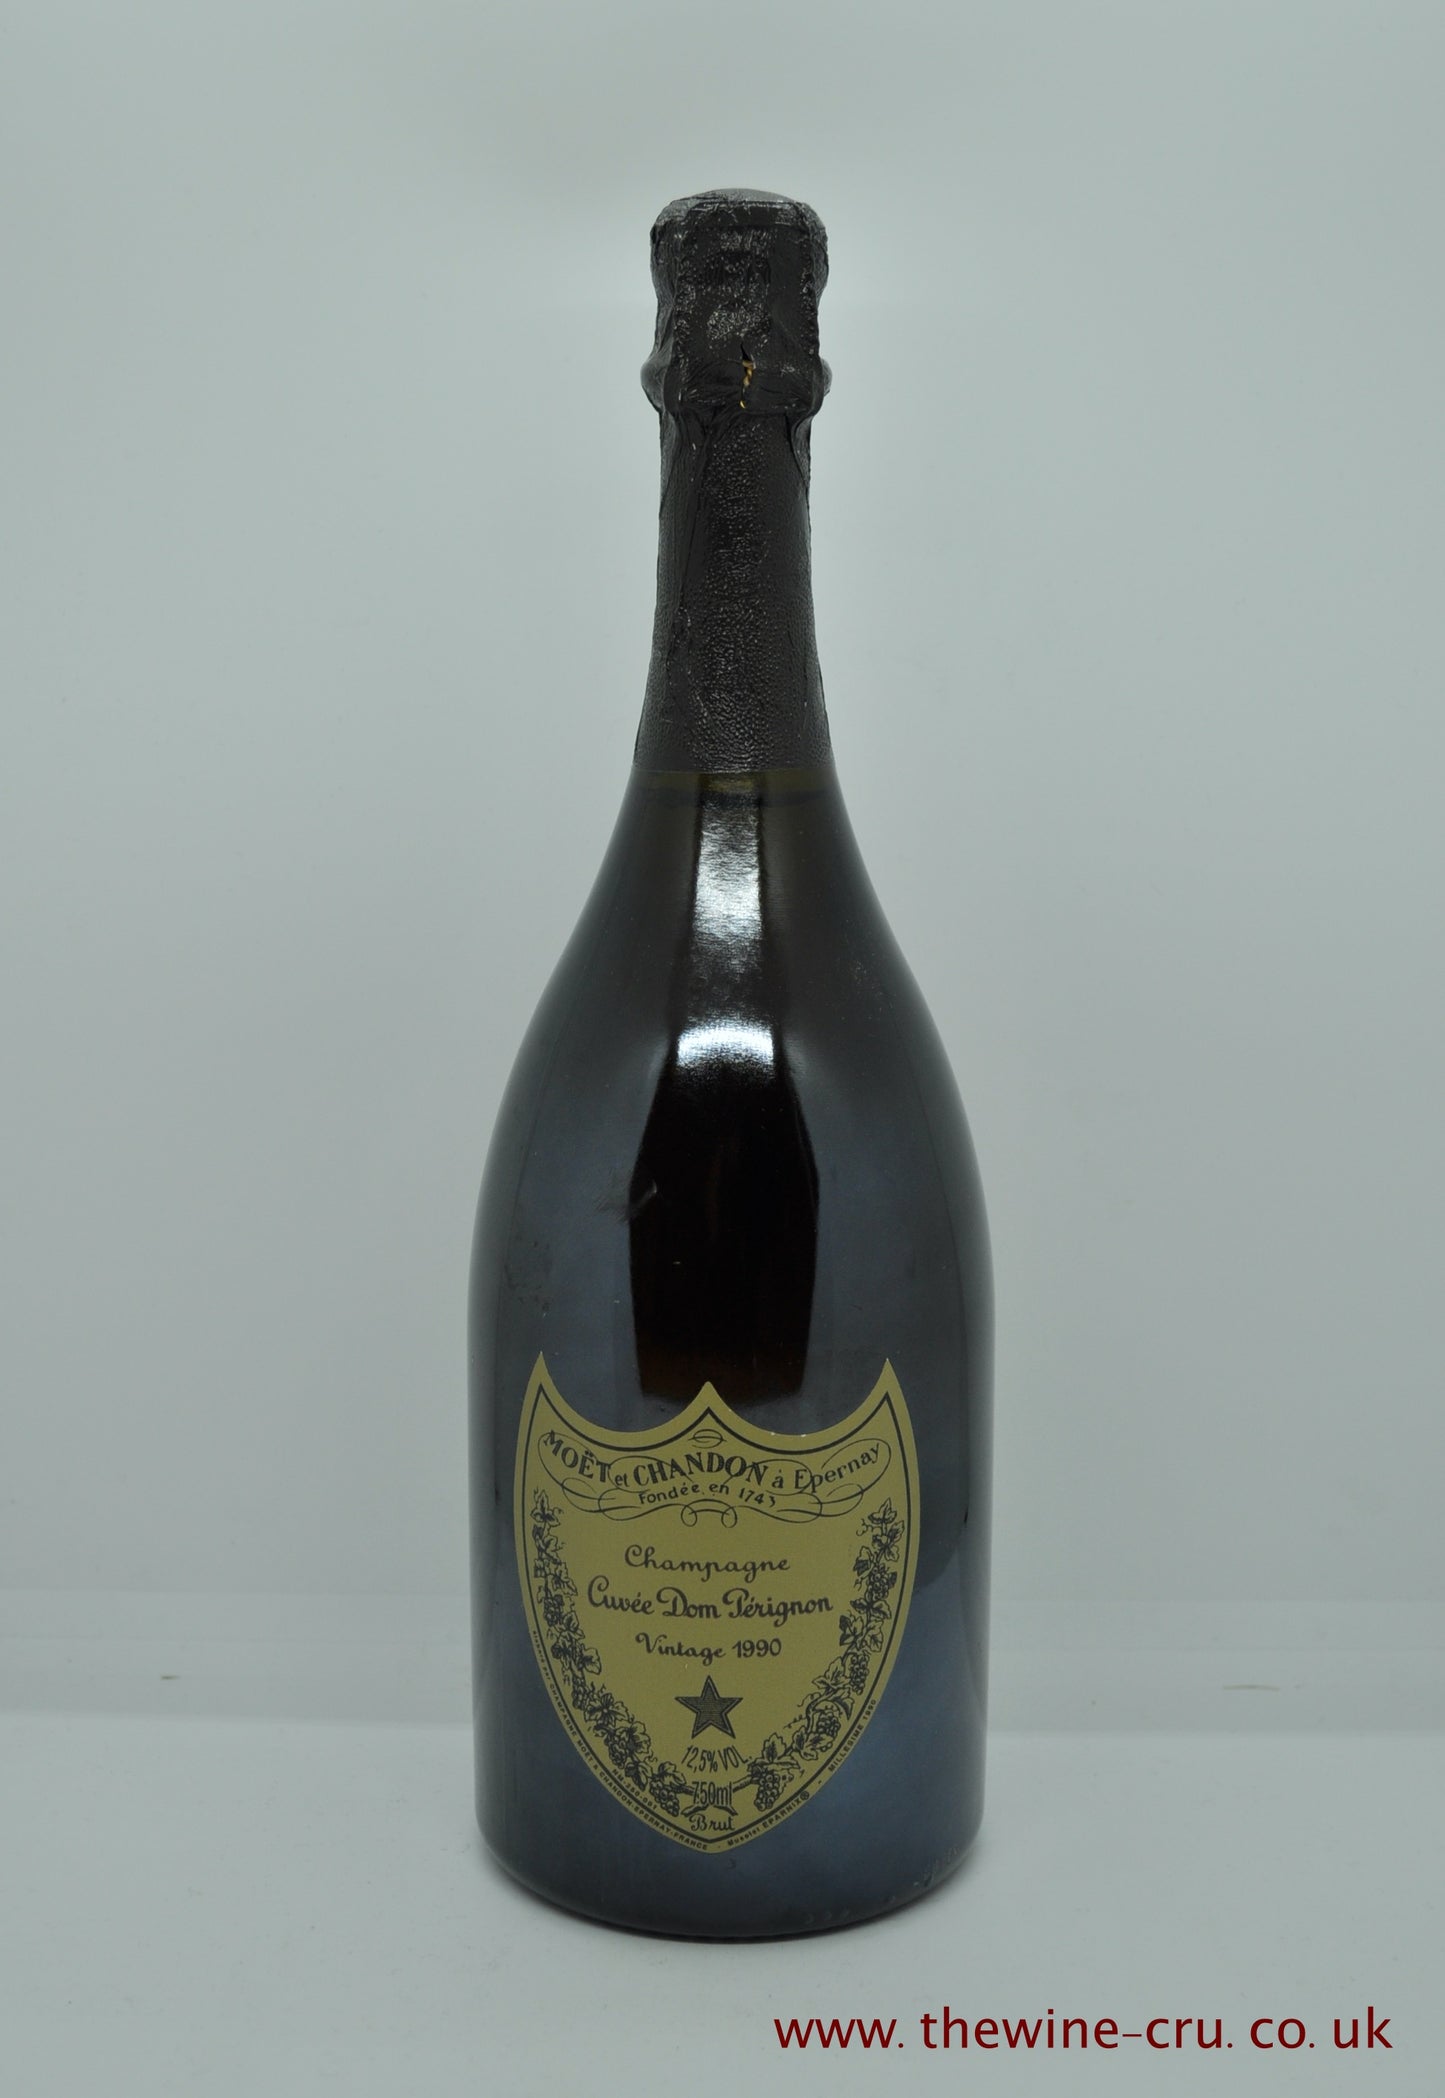 A bottle of 1990 vintage champagne. Dom Perignon, France. The bottle is in good condition. Immediate delivery. Free local delivery. Gift wrapping available.